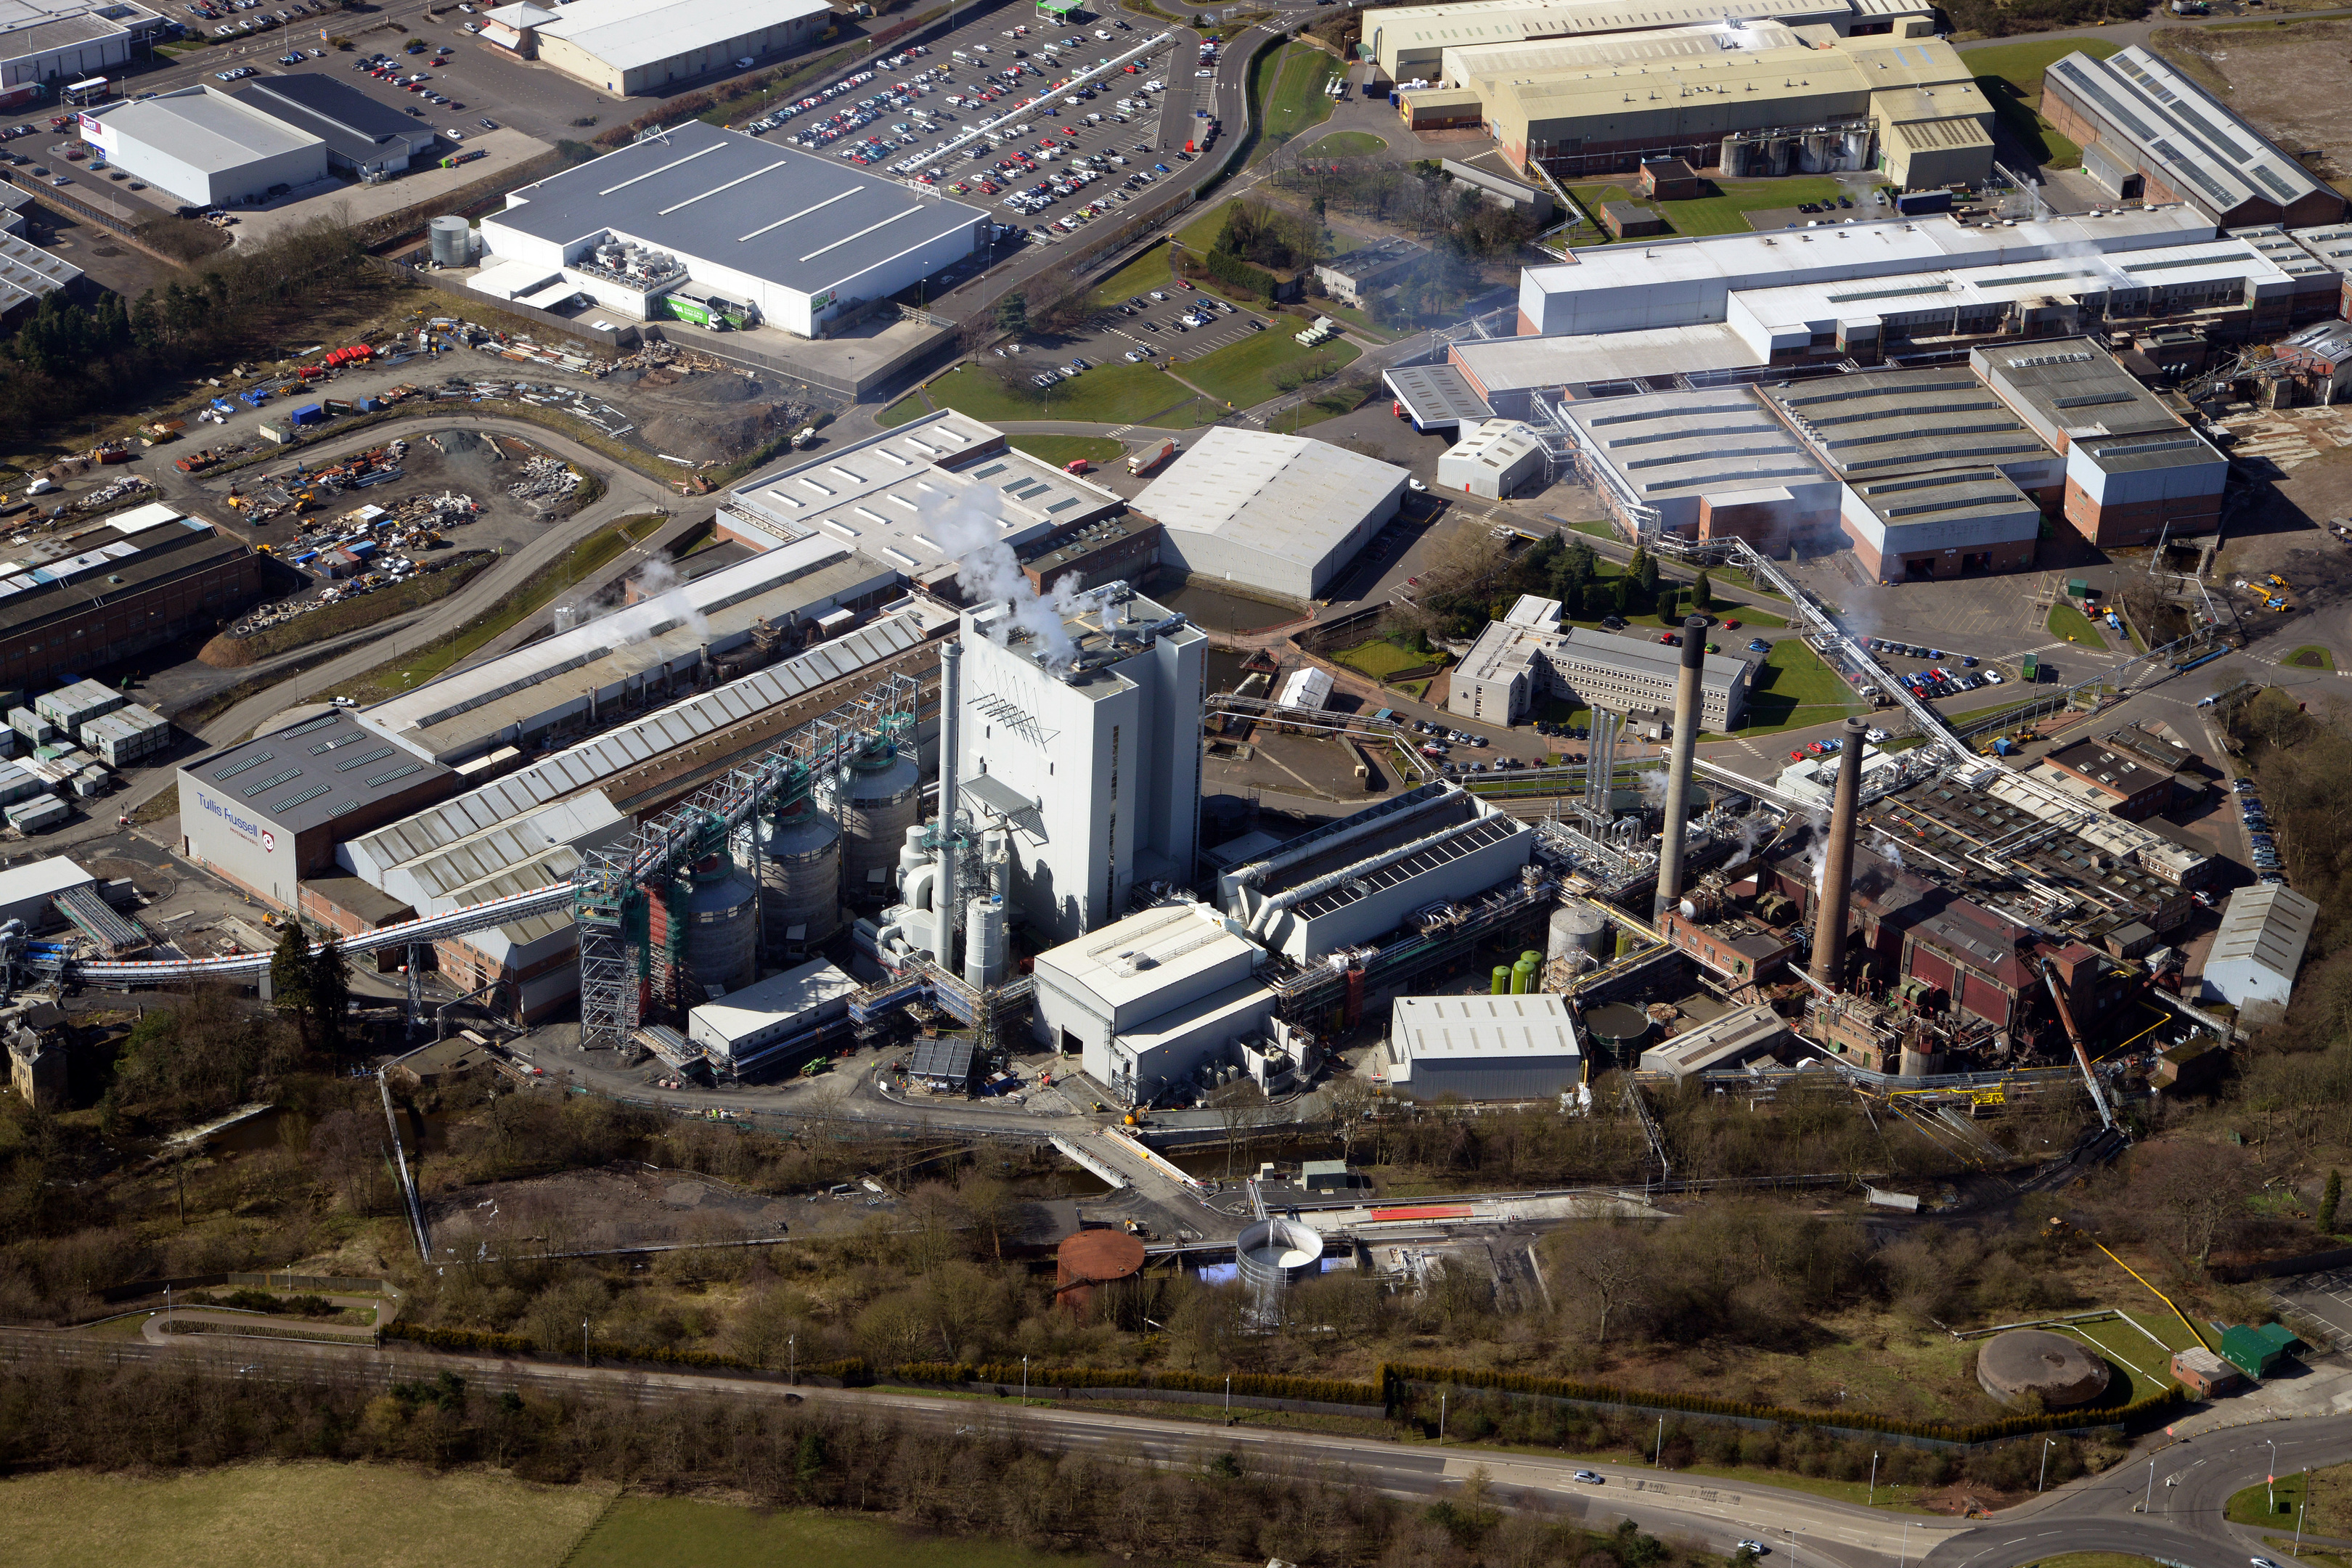 The biomass plant at Markinch.